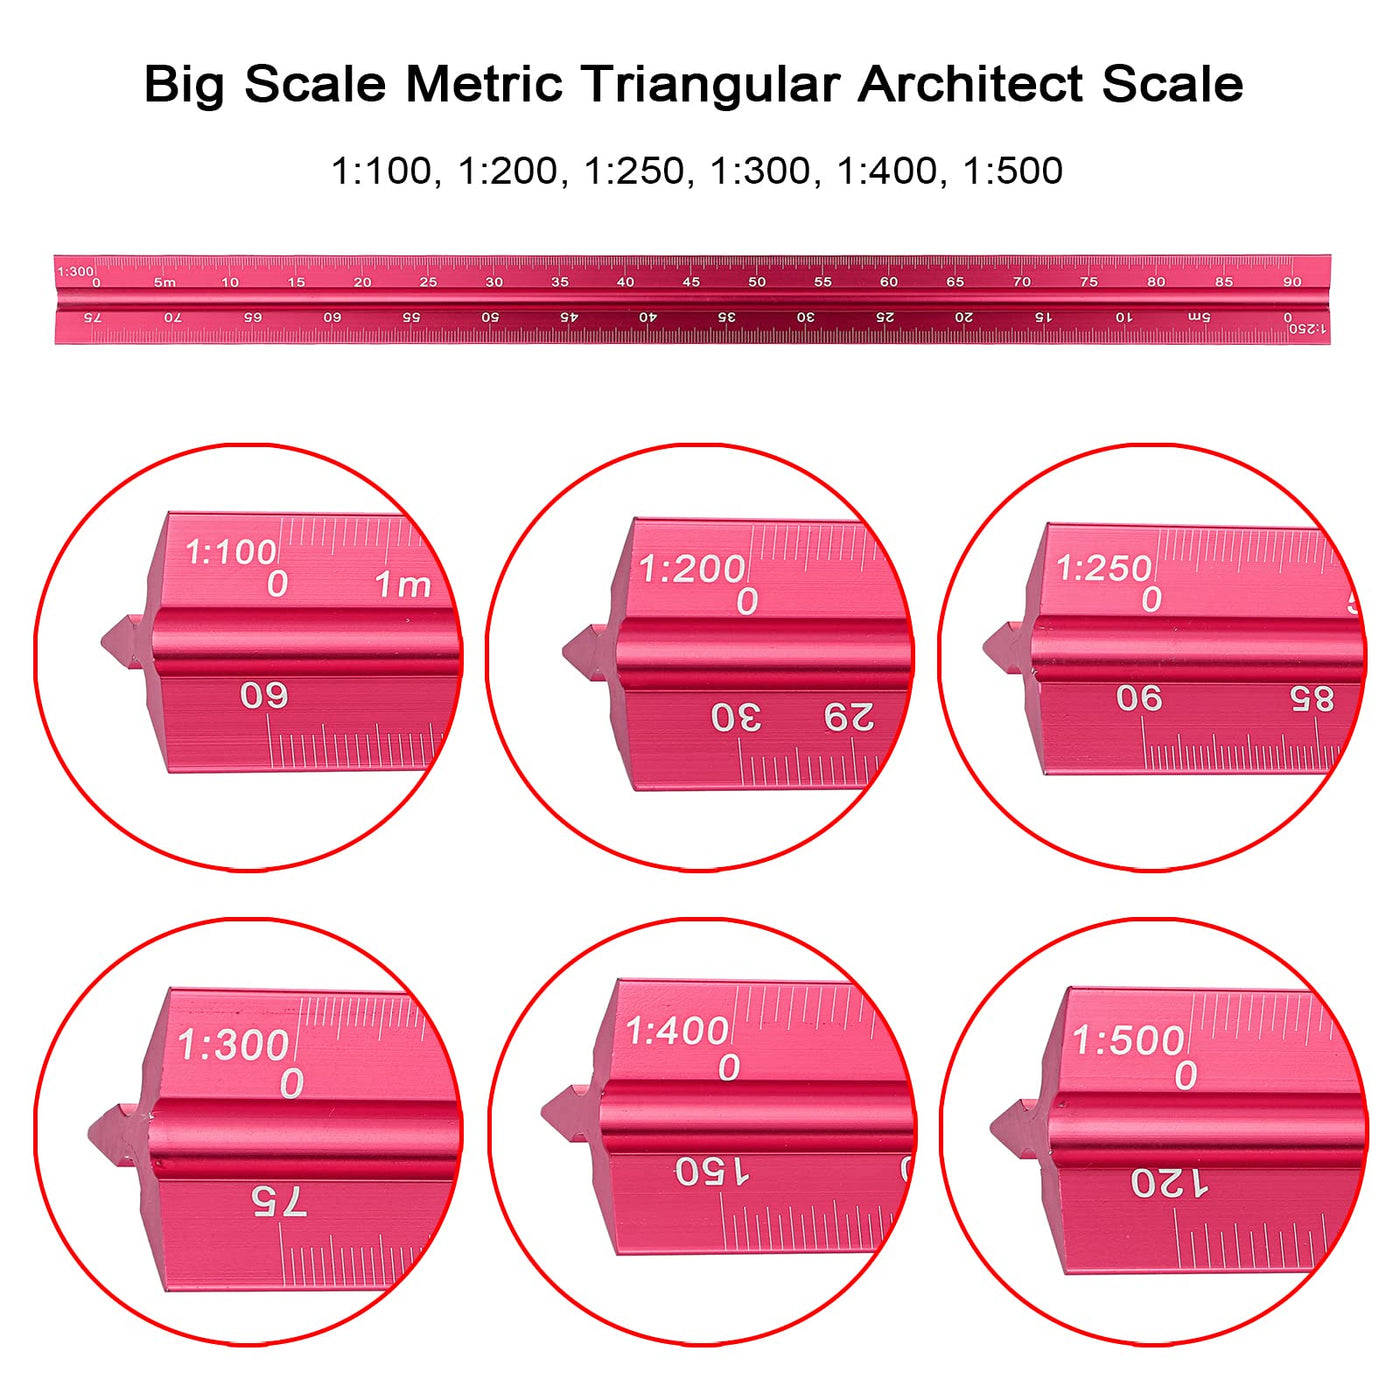 100 metric architectural scales